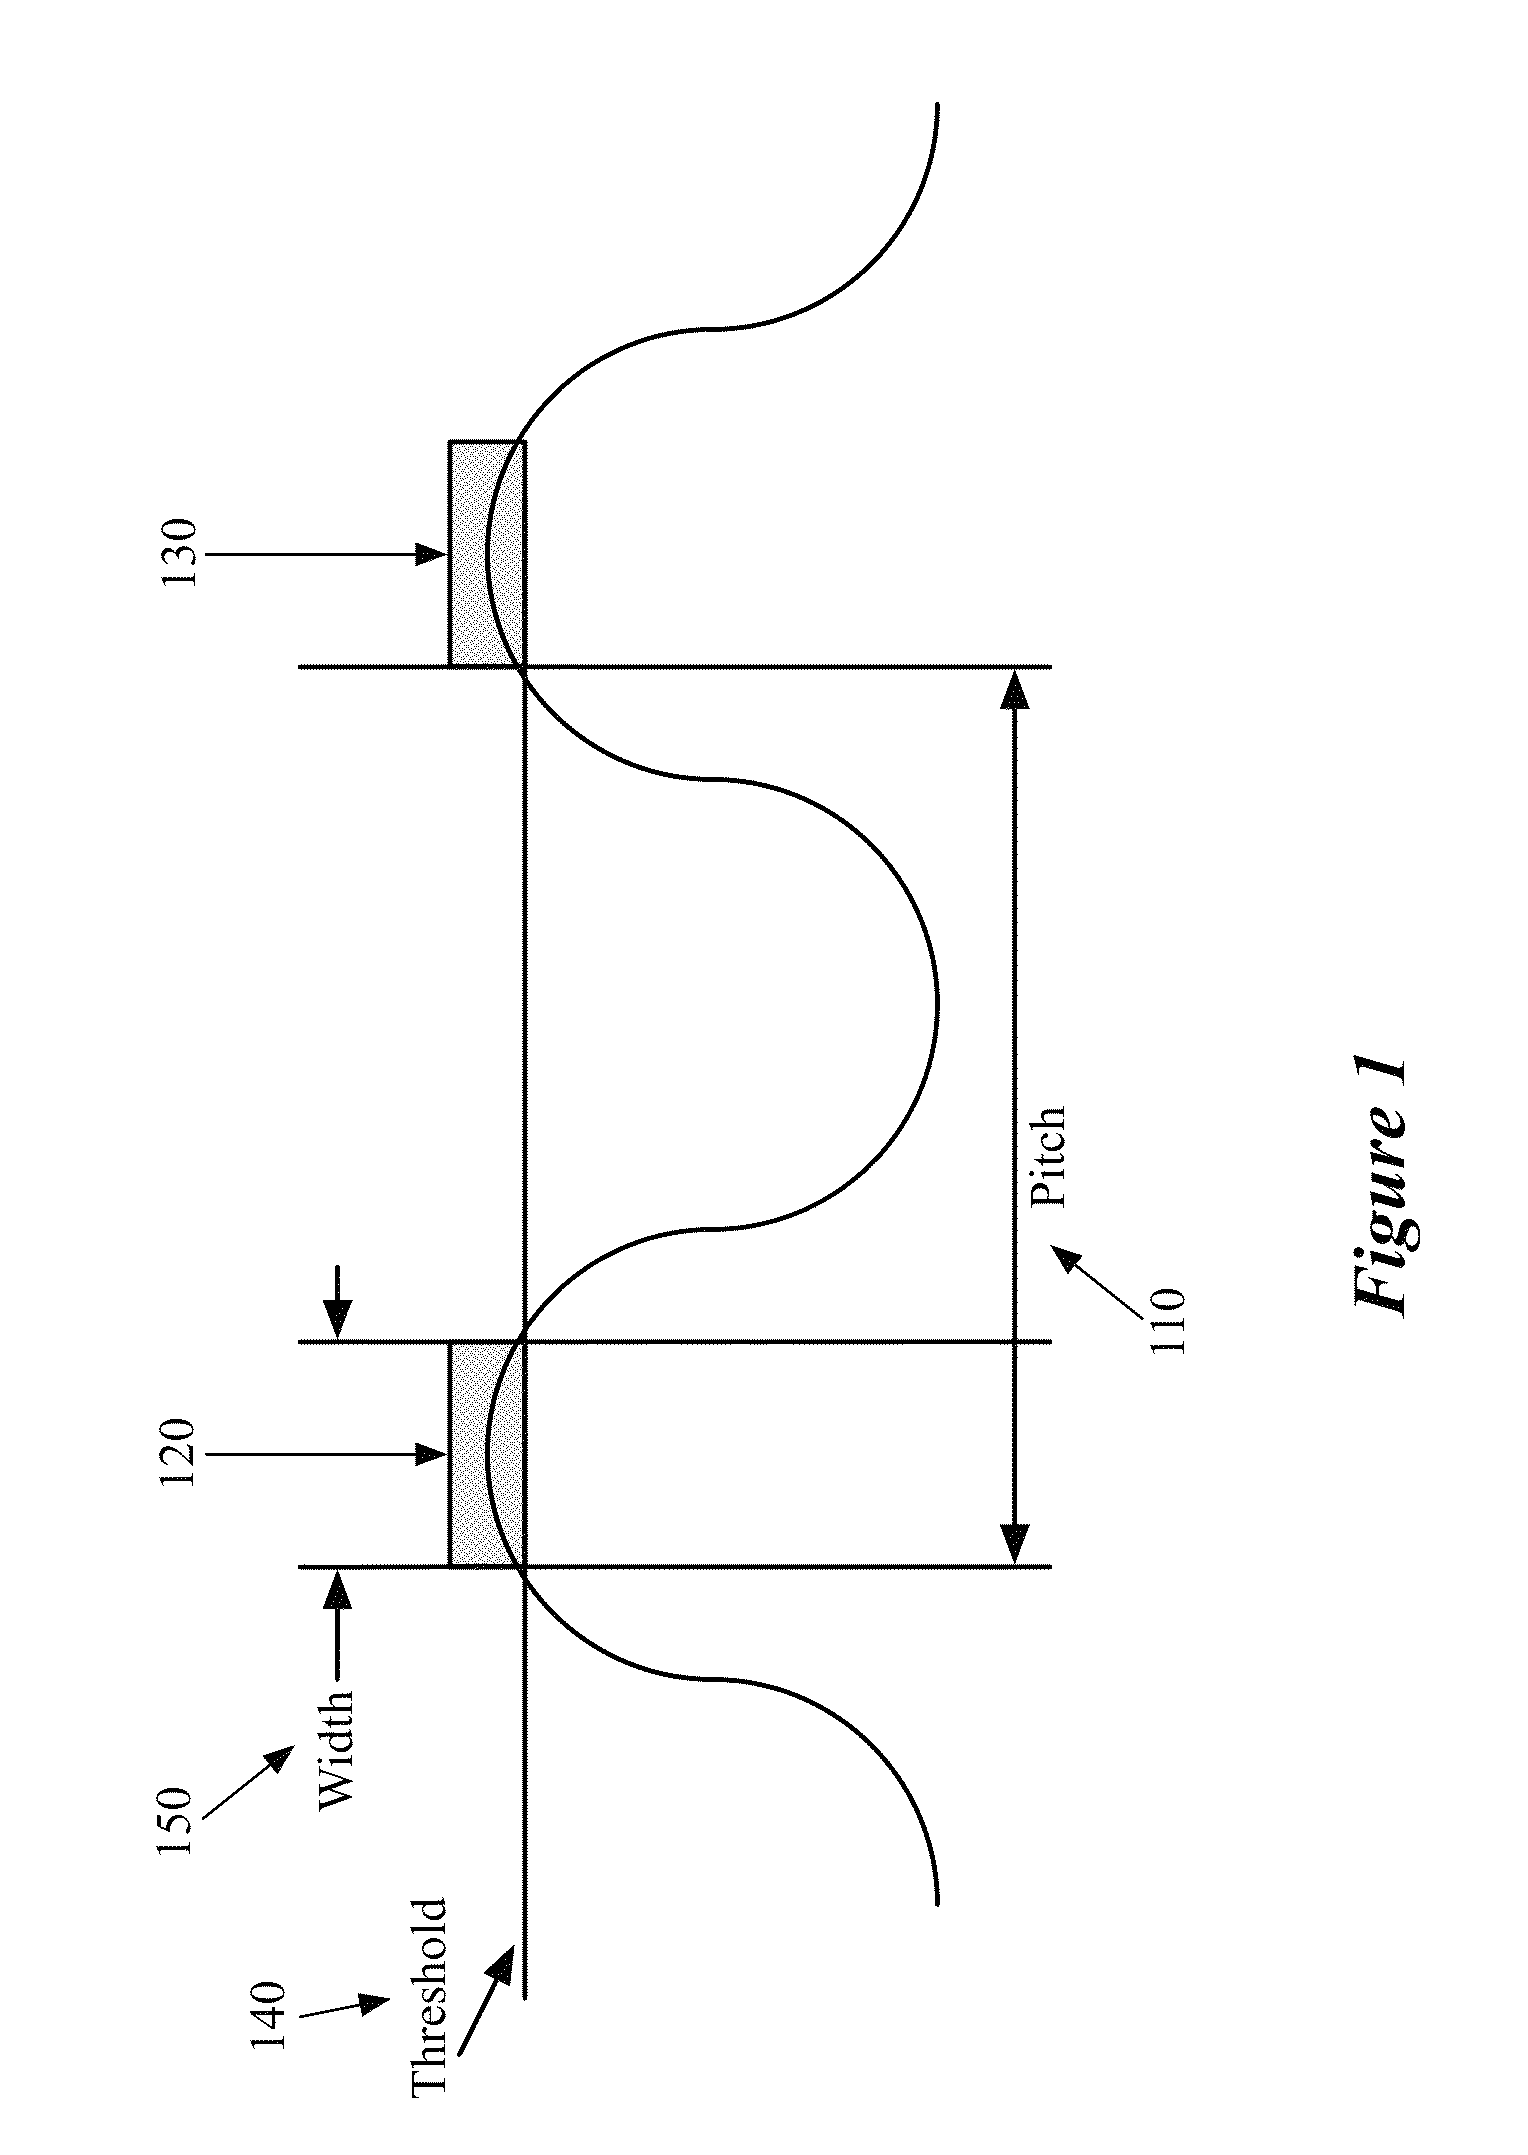 Method and apparatus for automatically fixing double patterning loop violations